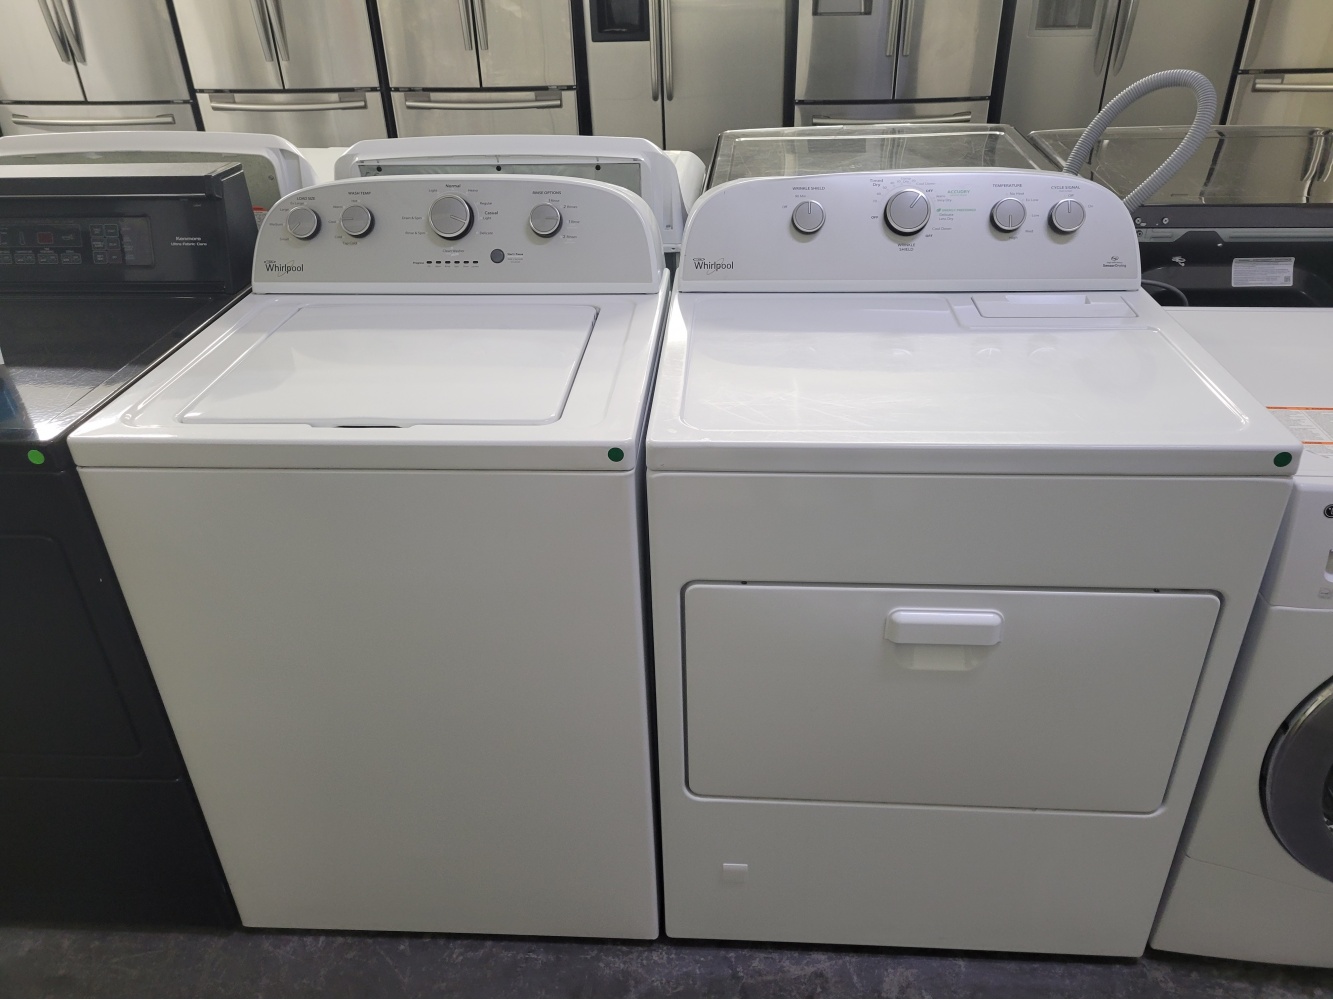 WHIRLPOOL HE TOP LOAD WASHER & GAS DRYER SET ***OUT OF STOCK*** Kimo's Appliances Van Nuys